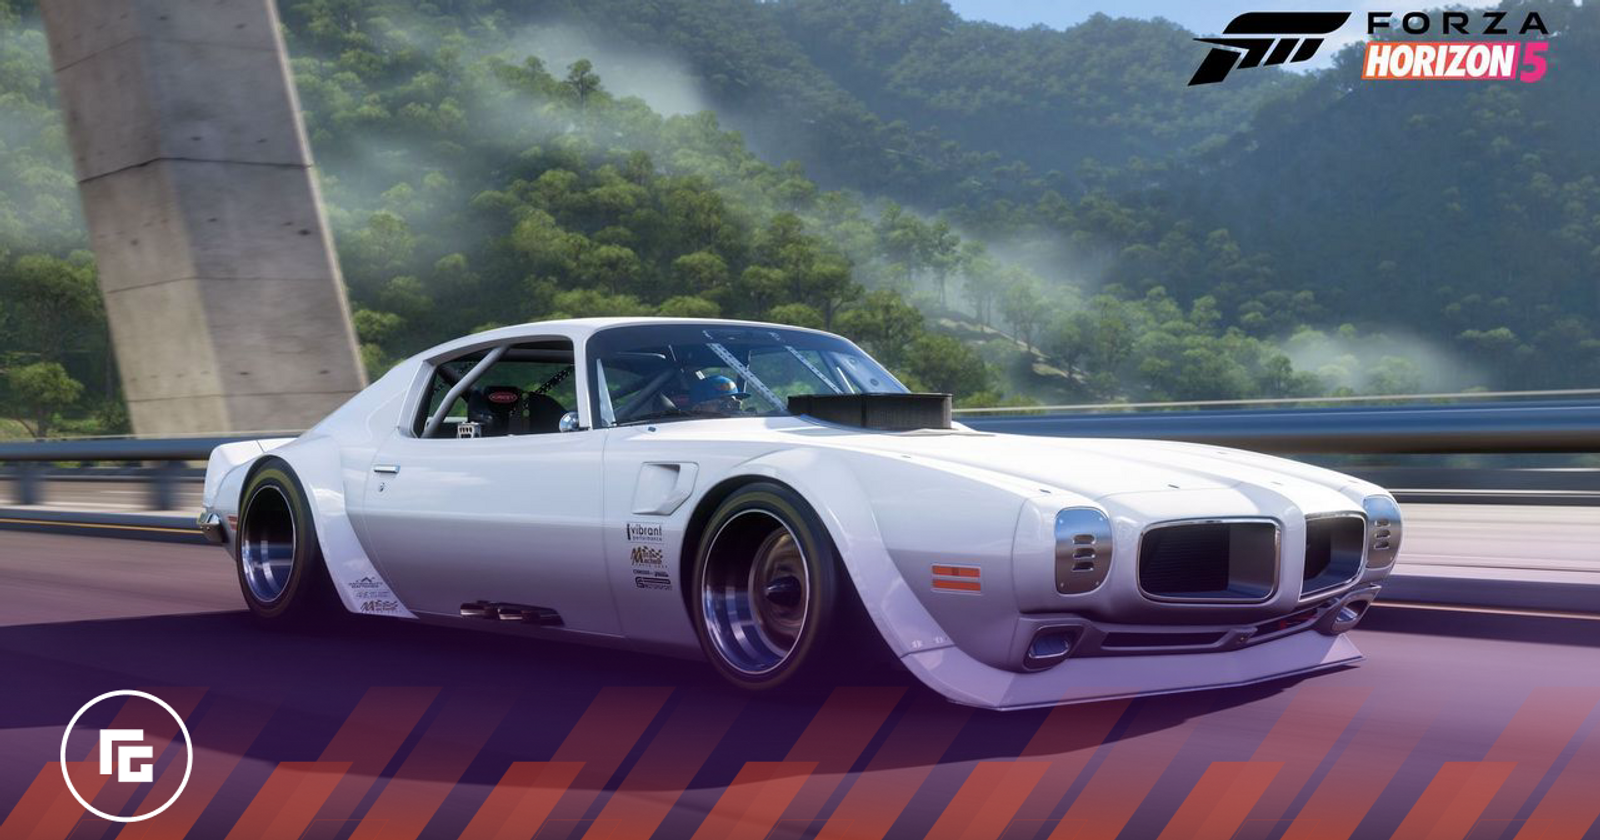 Forza Horizon 4 Series 30 Now Available, With Six New Cars and